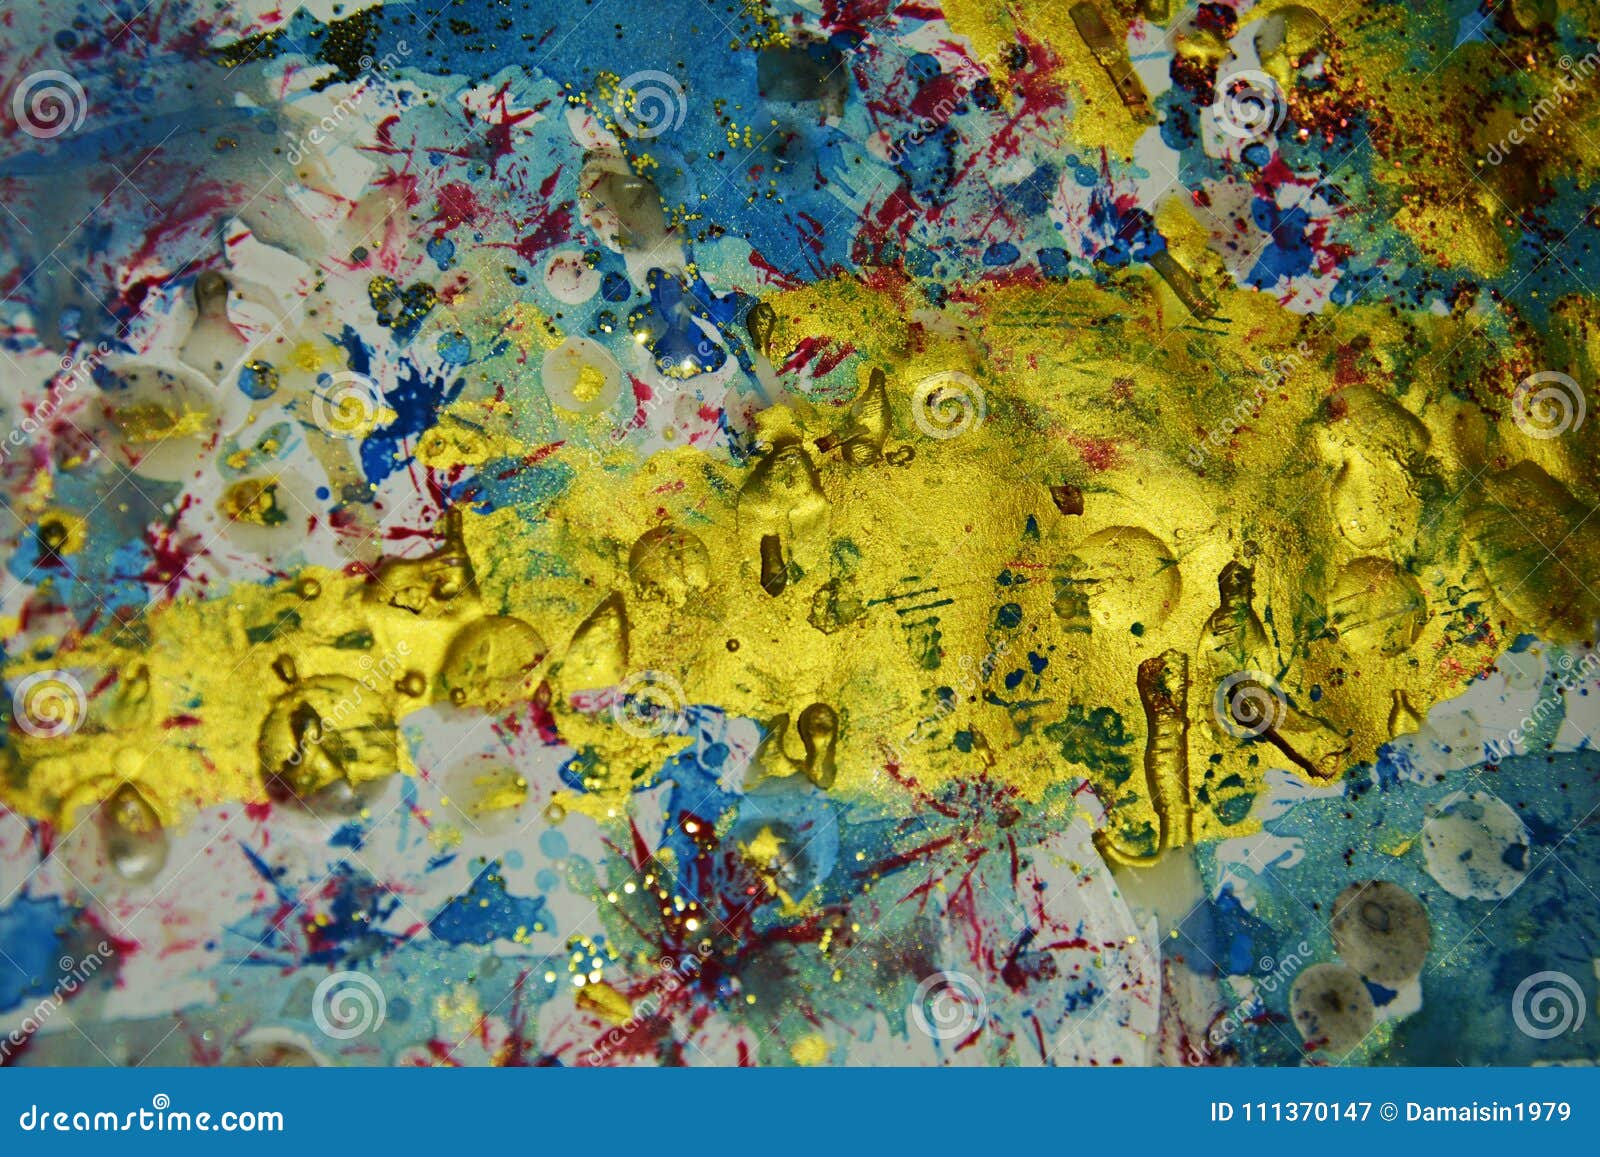 gold blue pink splashes, contrasts, paint watercolor creative background